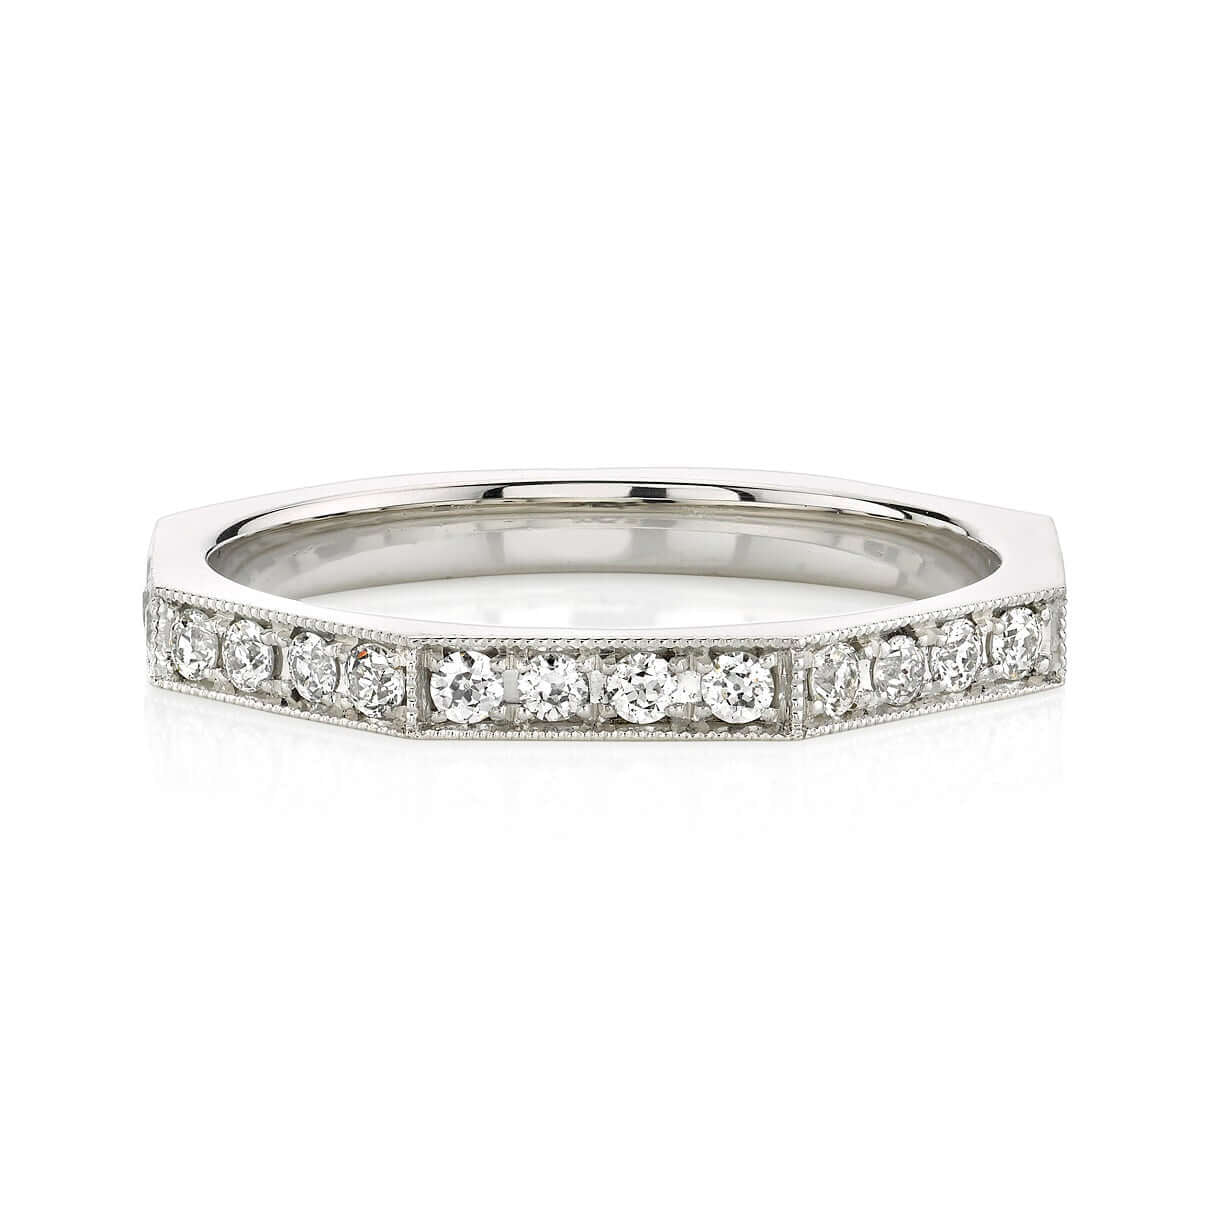 SINGLE STONE REILYN BAND | Approximately 0.65ctw old European cut diamonds set in a handcrafted octagonal sectional band Approximate band with 2.2mm. Please inquire for additional customization.